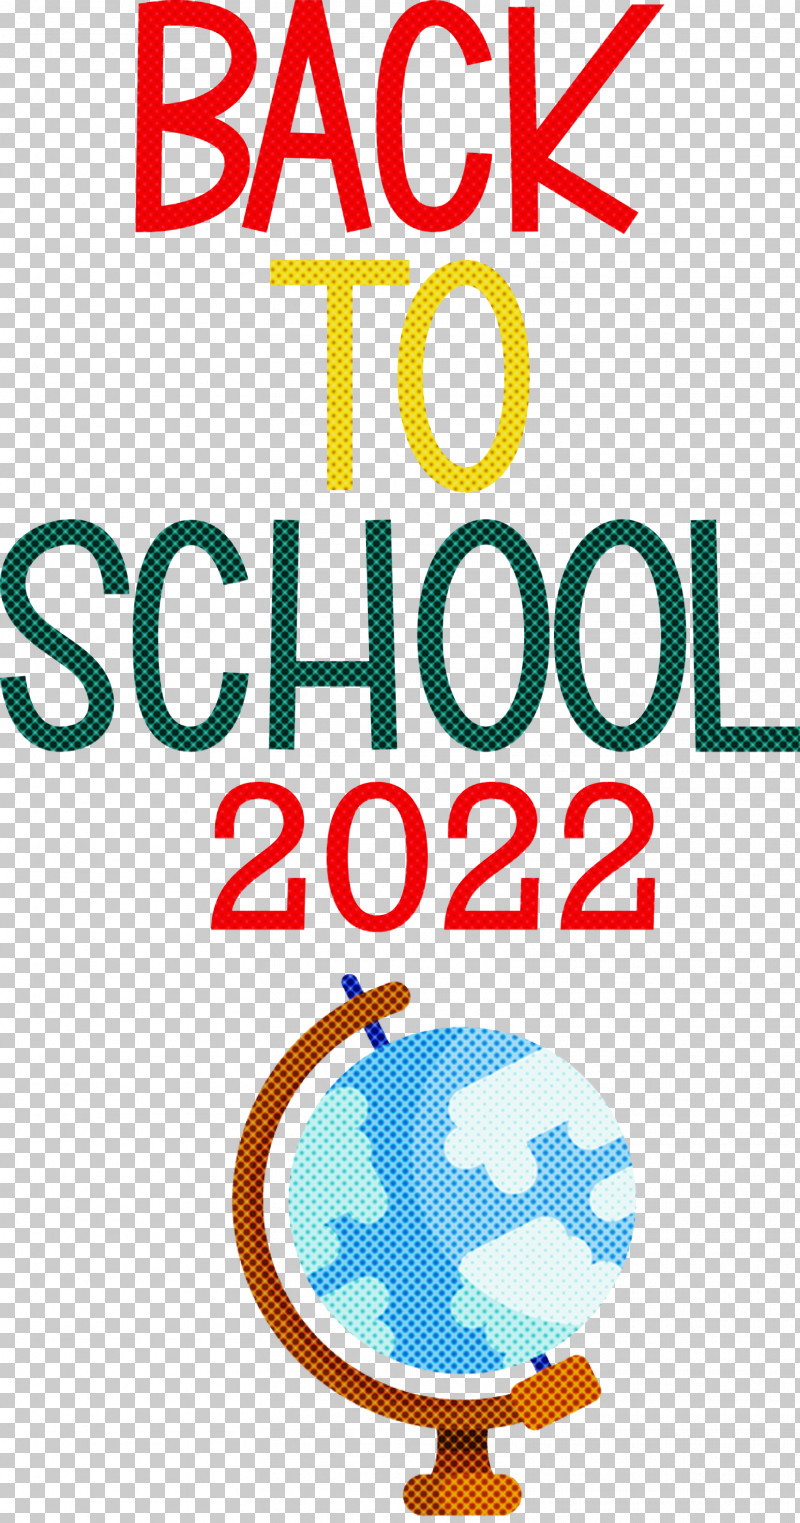 Back To School 2022 PNG, Clipart, Behavior, Geometry, Human, Line, Logo Free PNG Download